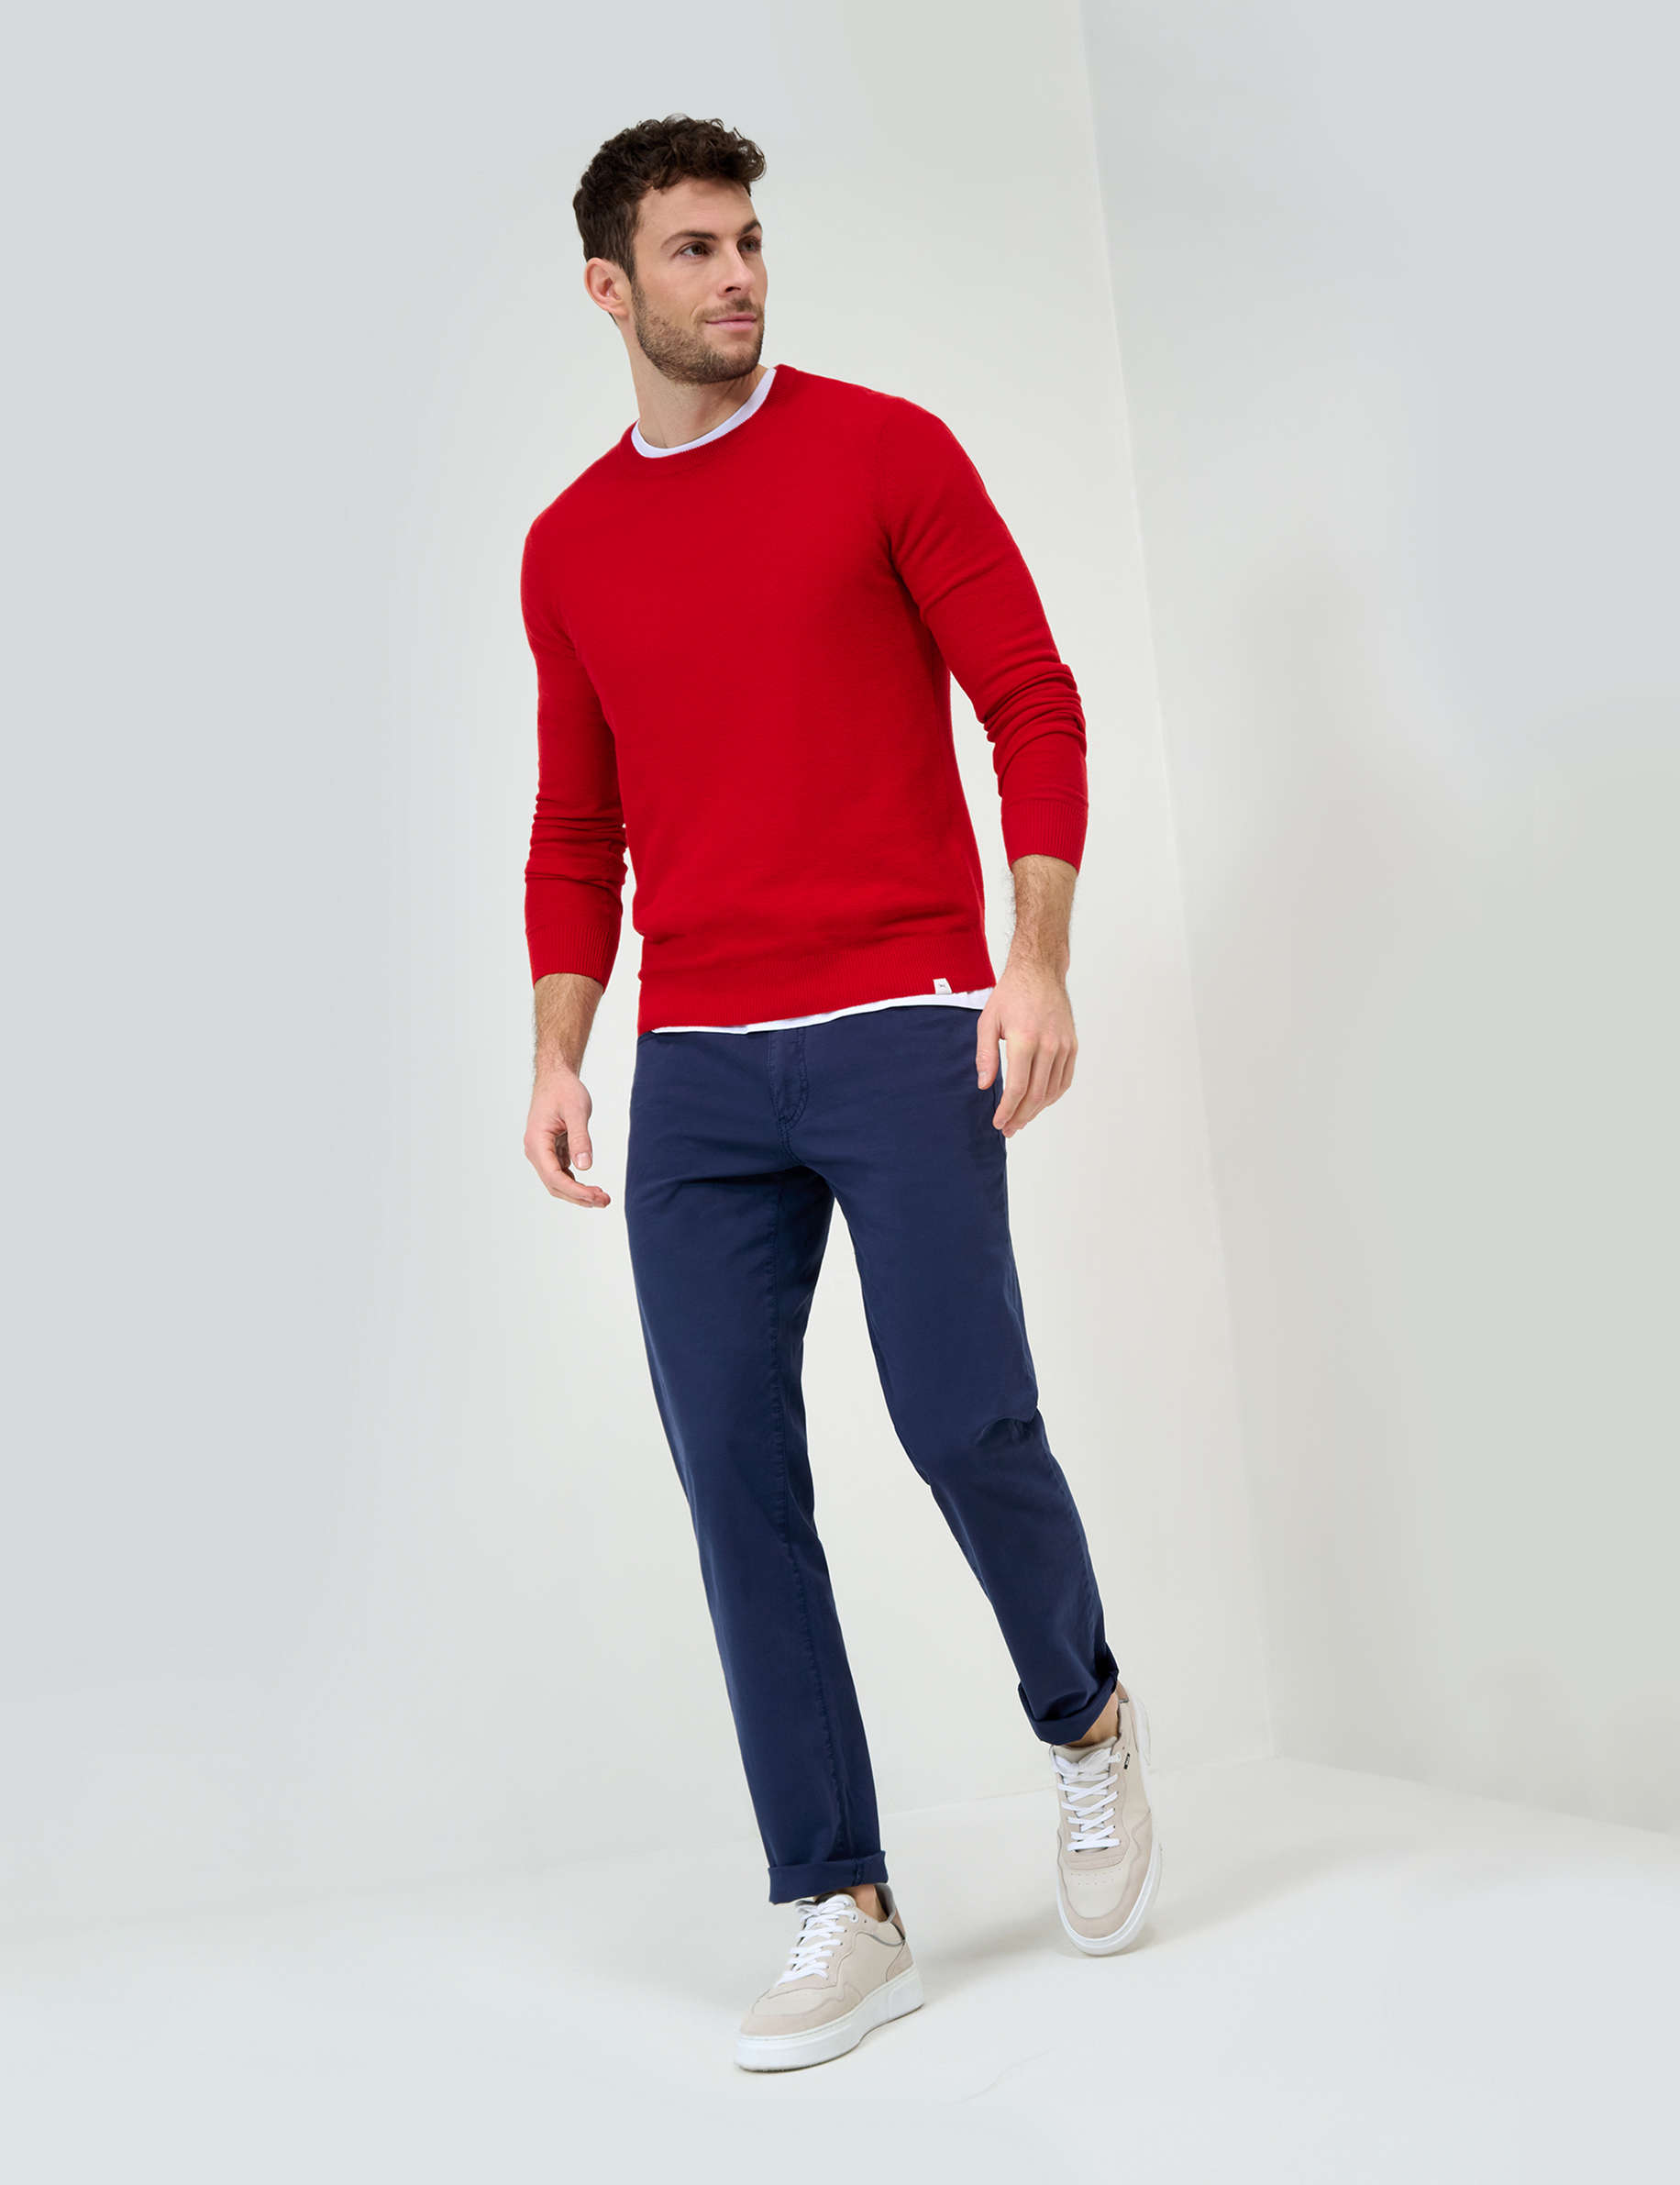 Men Style RICK signal red  Model Outfit